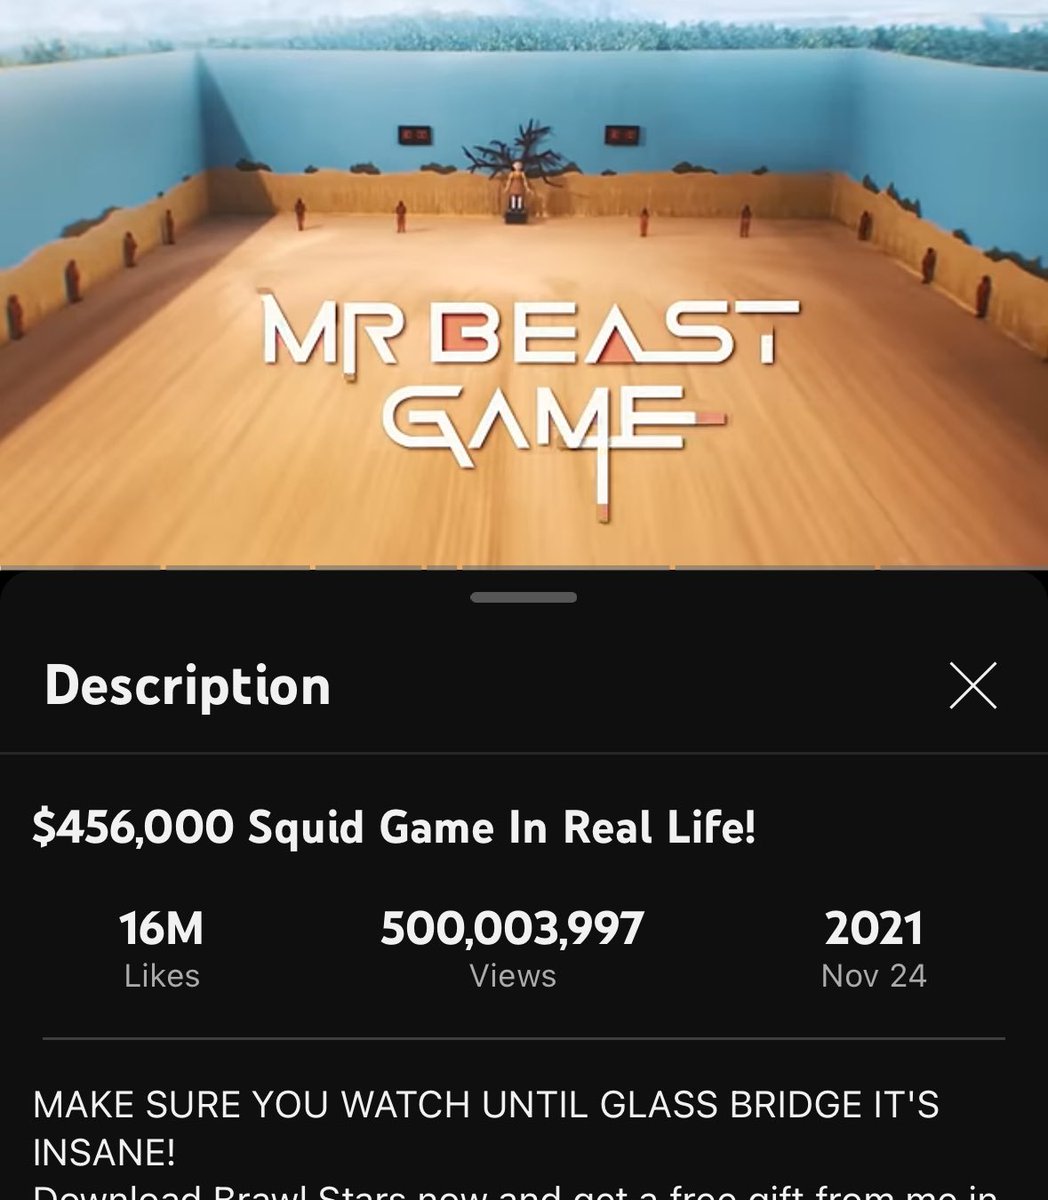 mrbeast’s squid game I helped work on just reached half of a billion views